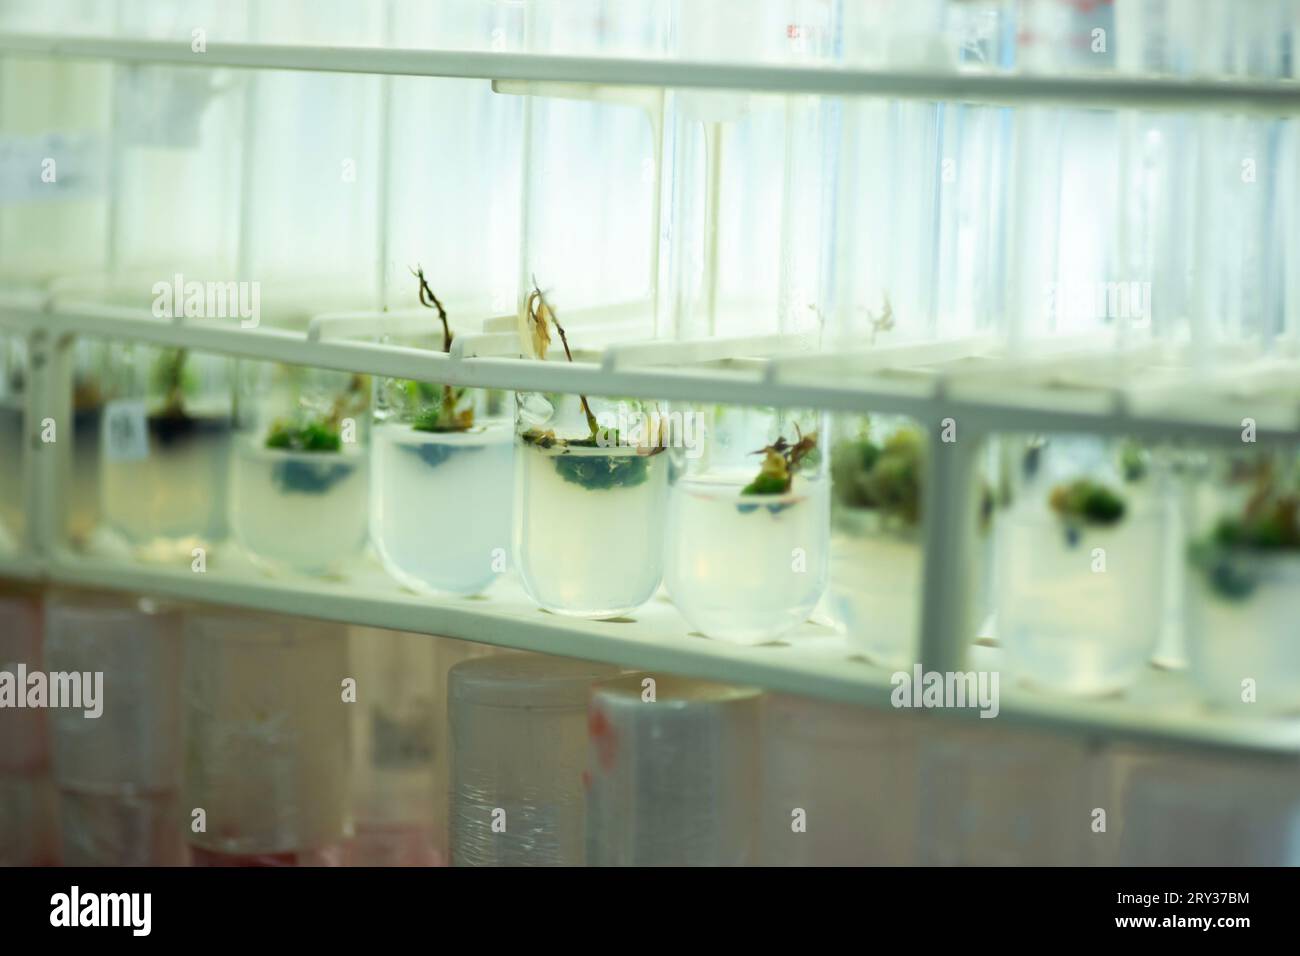 Plant Tissue Culture for Agricultural Research, stem Cell Regeneration in Plant Tissue Culture Stock Photo